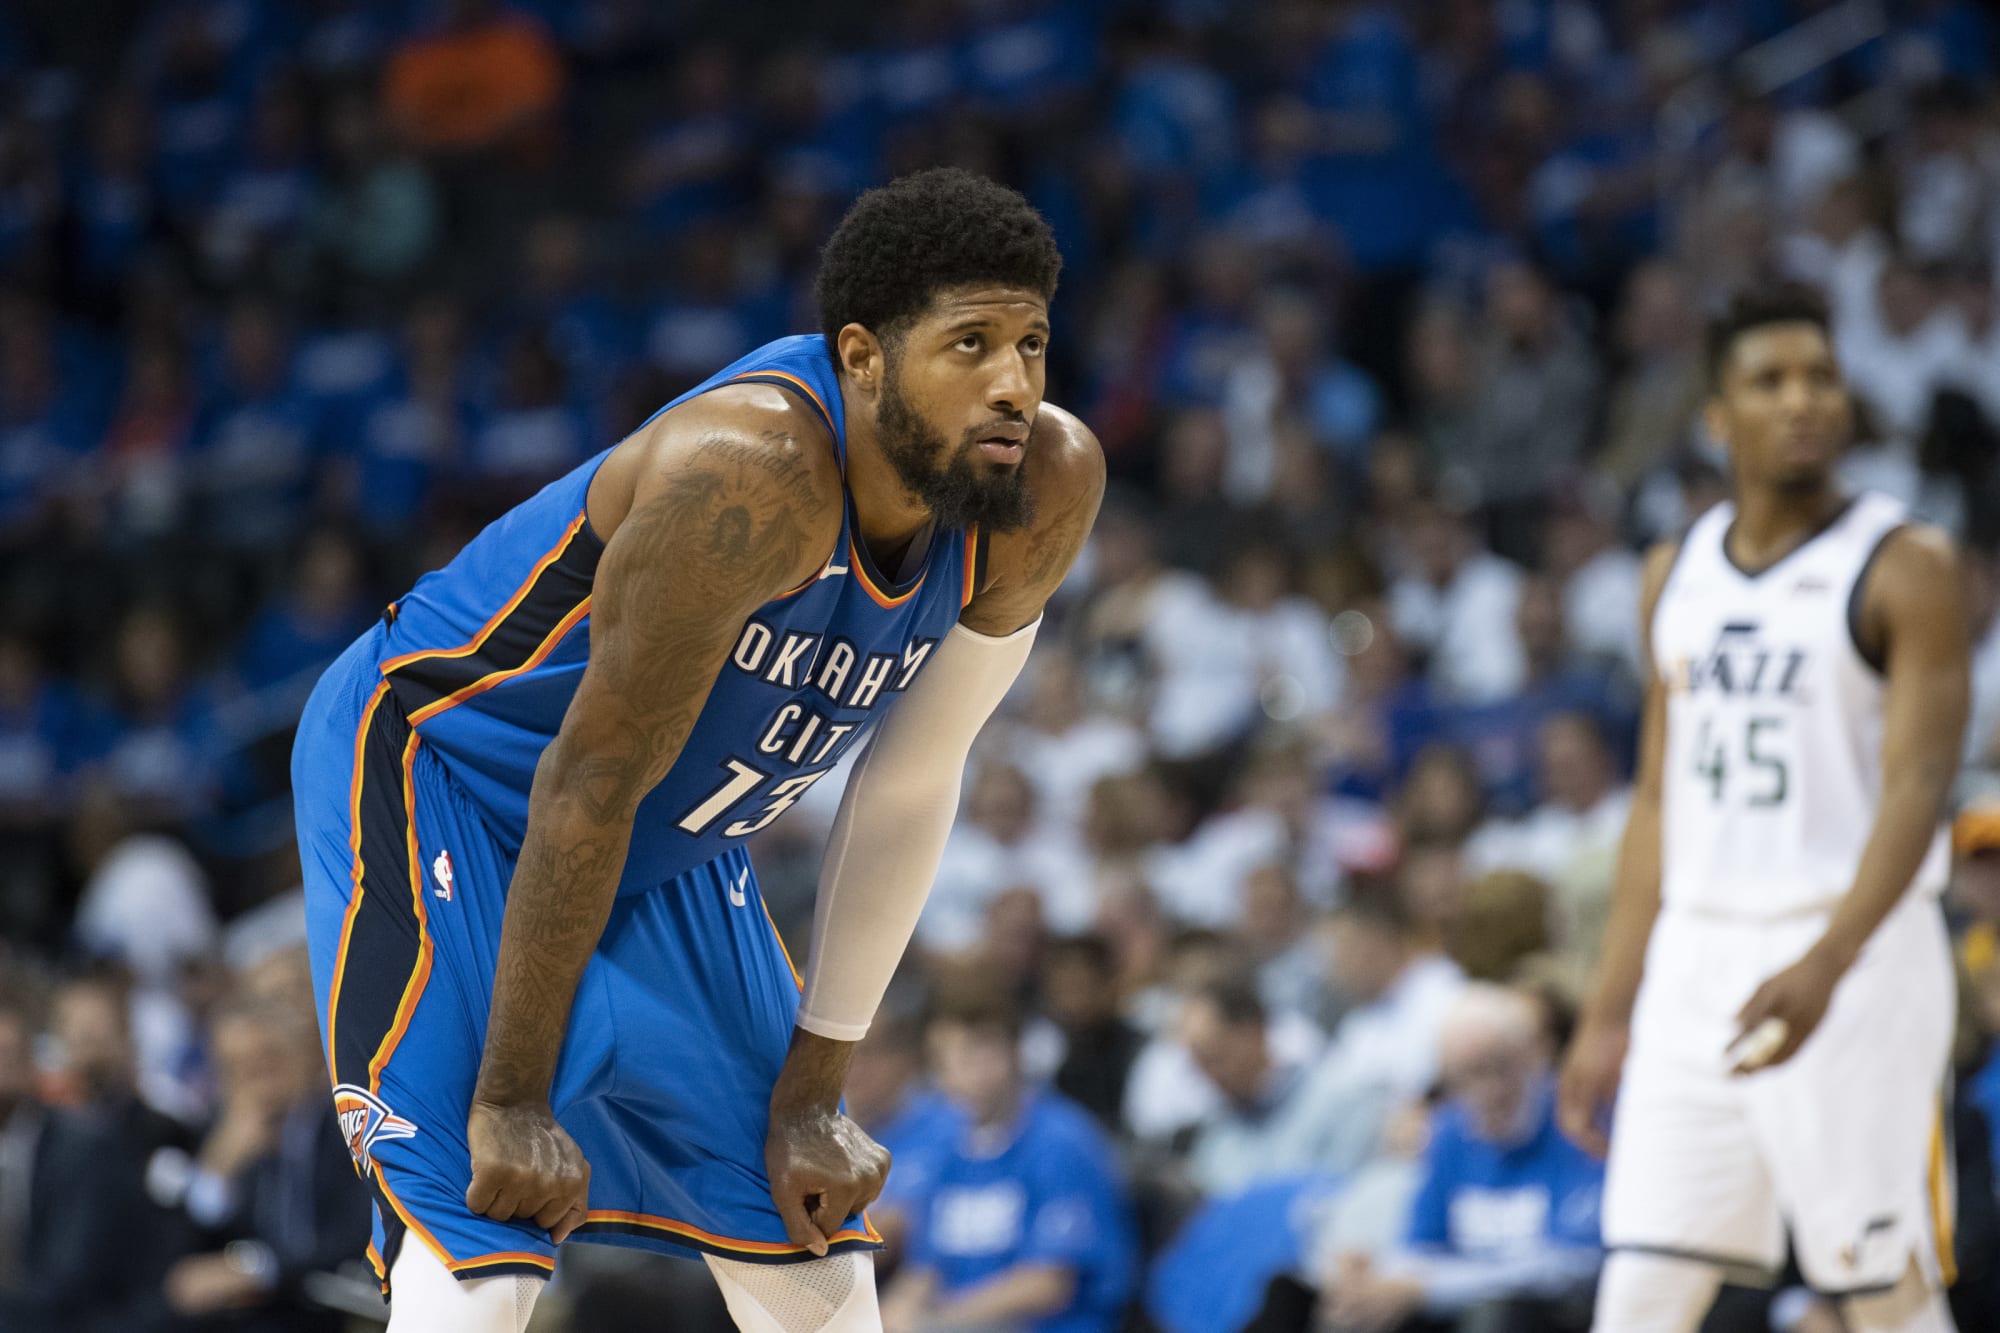 Paul George Re-Signed With Oklahoma City Thunder: 'I'm Here to Stay.